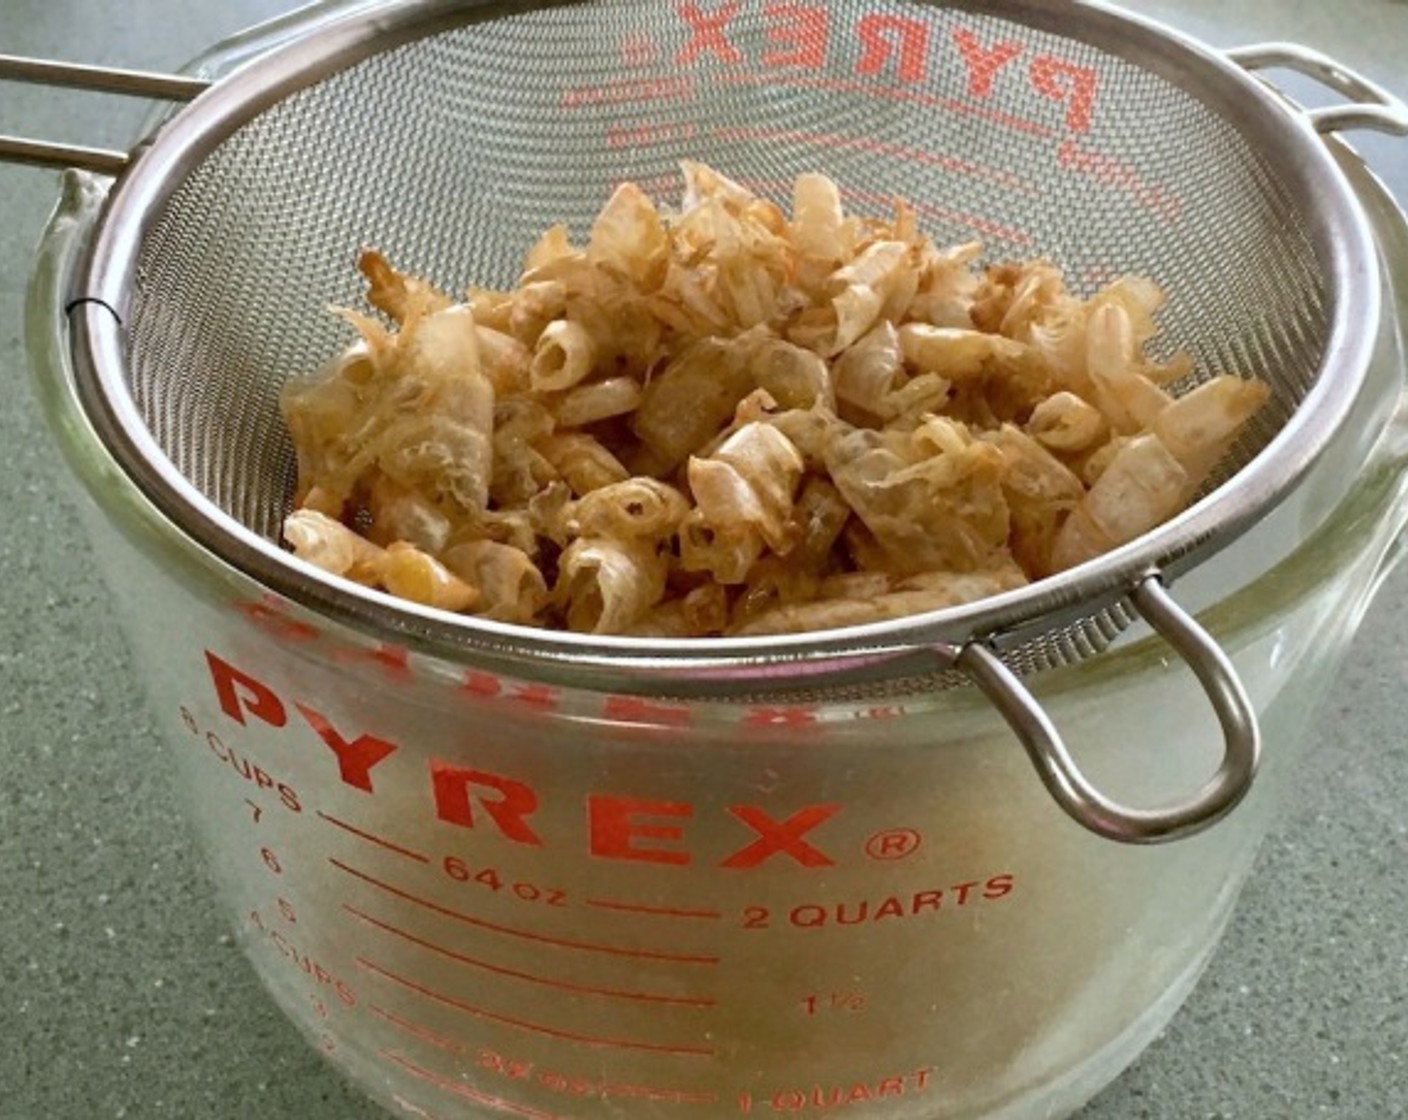 step 4 Strain shells through a sieve, pressing gently on them to extract all liquid into a bowl. Discard the shells.